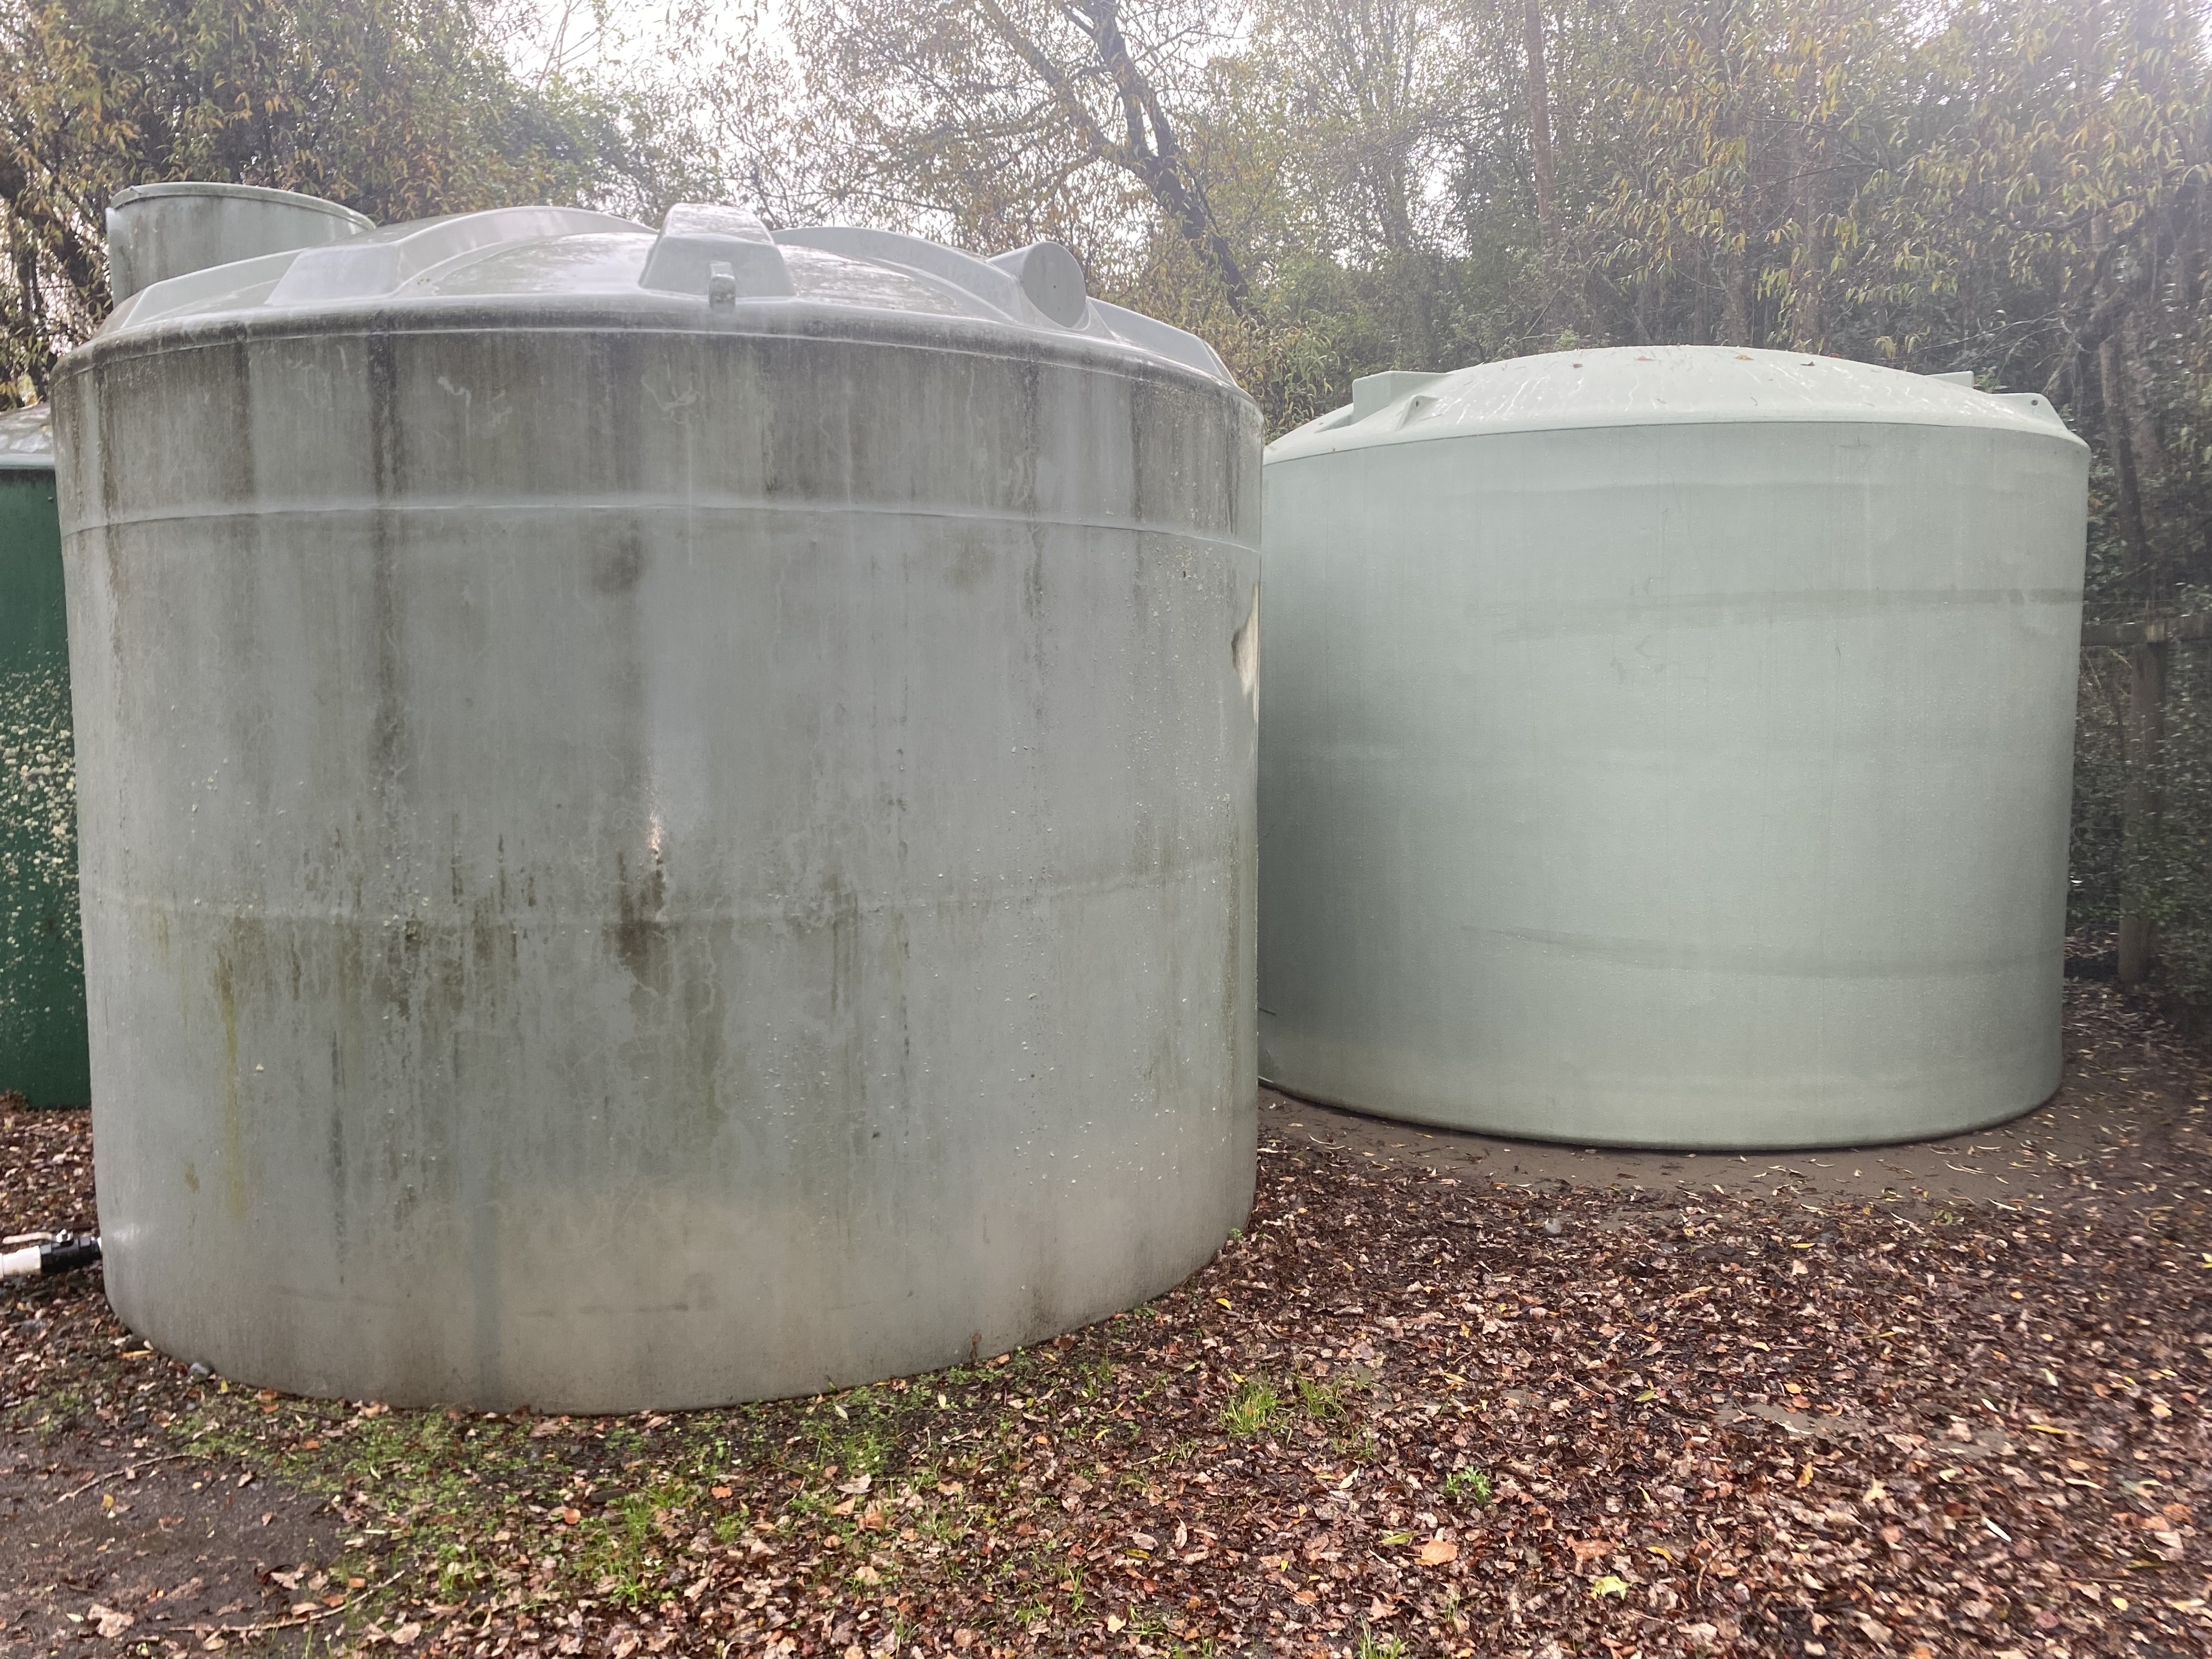 Norsewood Water Treatment Plant update